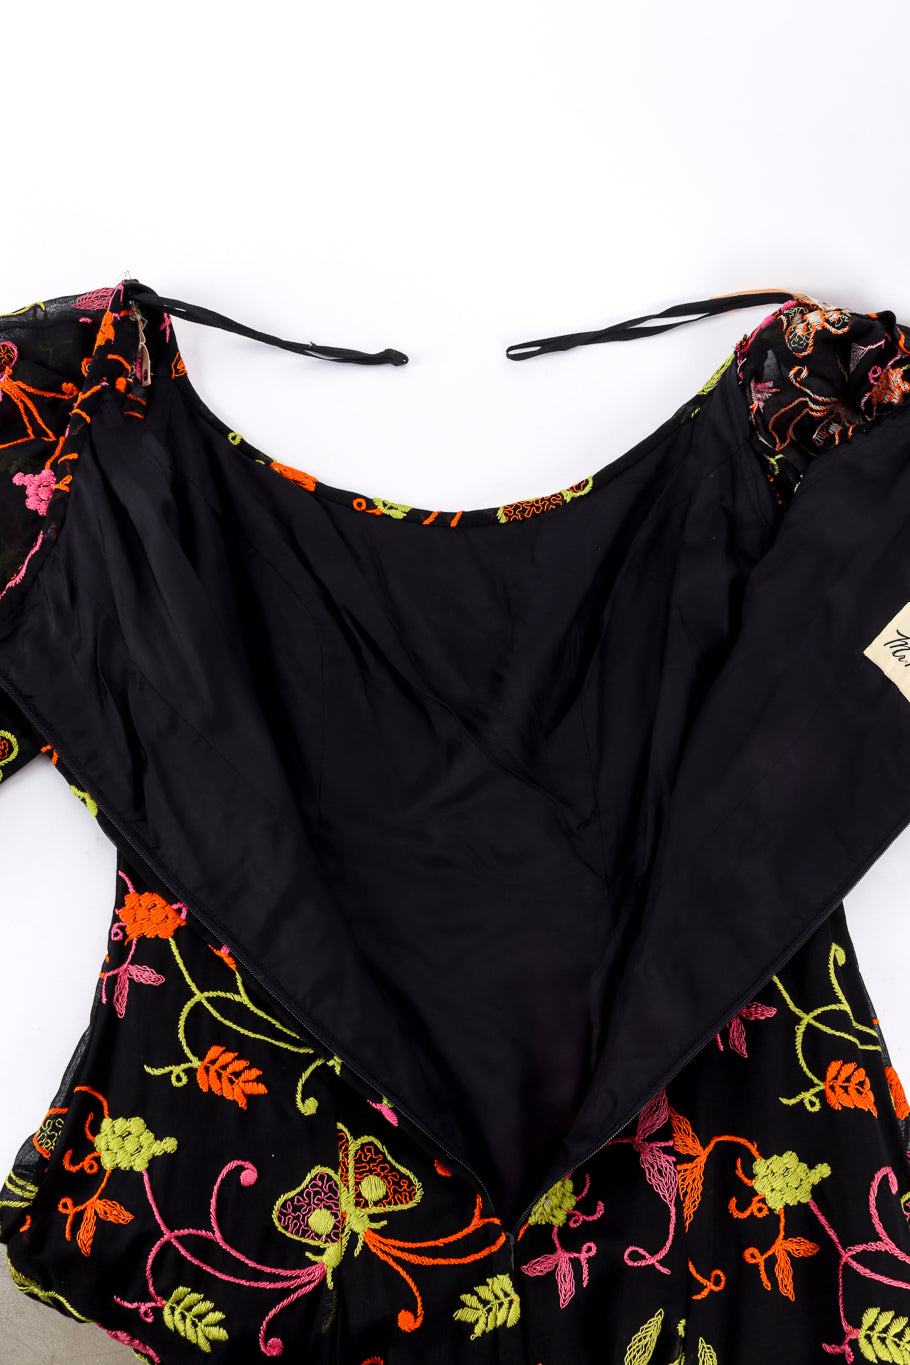 Vintage Mr. Blackwell Embroidered Butterfly Peasant Dress back unzipped @recess la